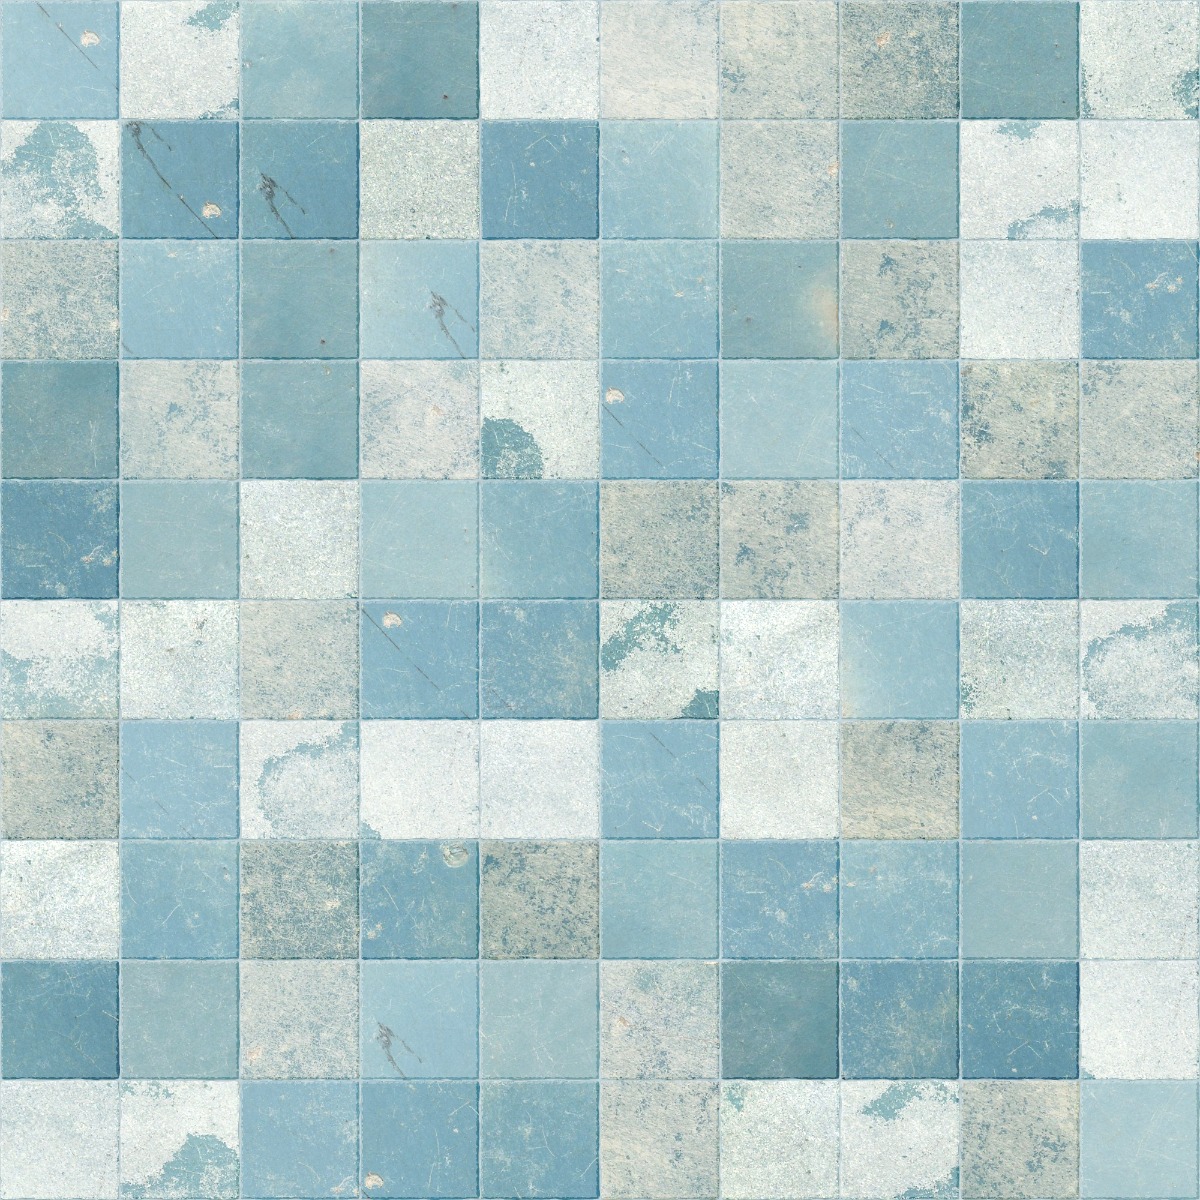 A seamless  texture with blue tile units arranged in a Stack pattern